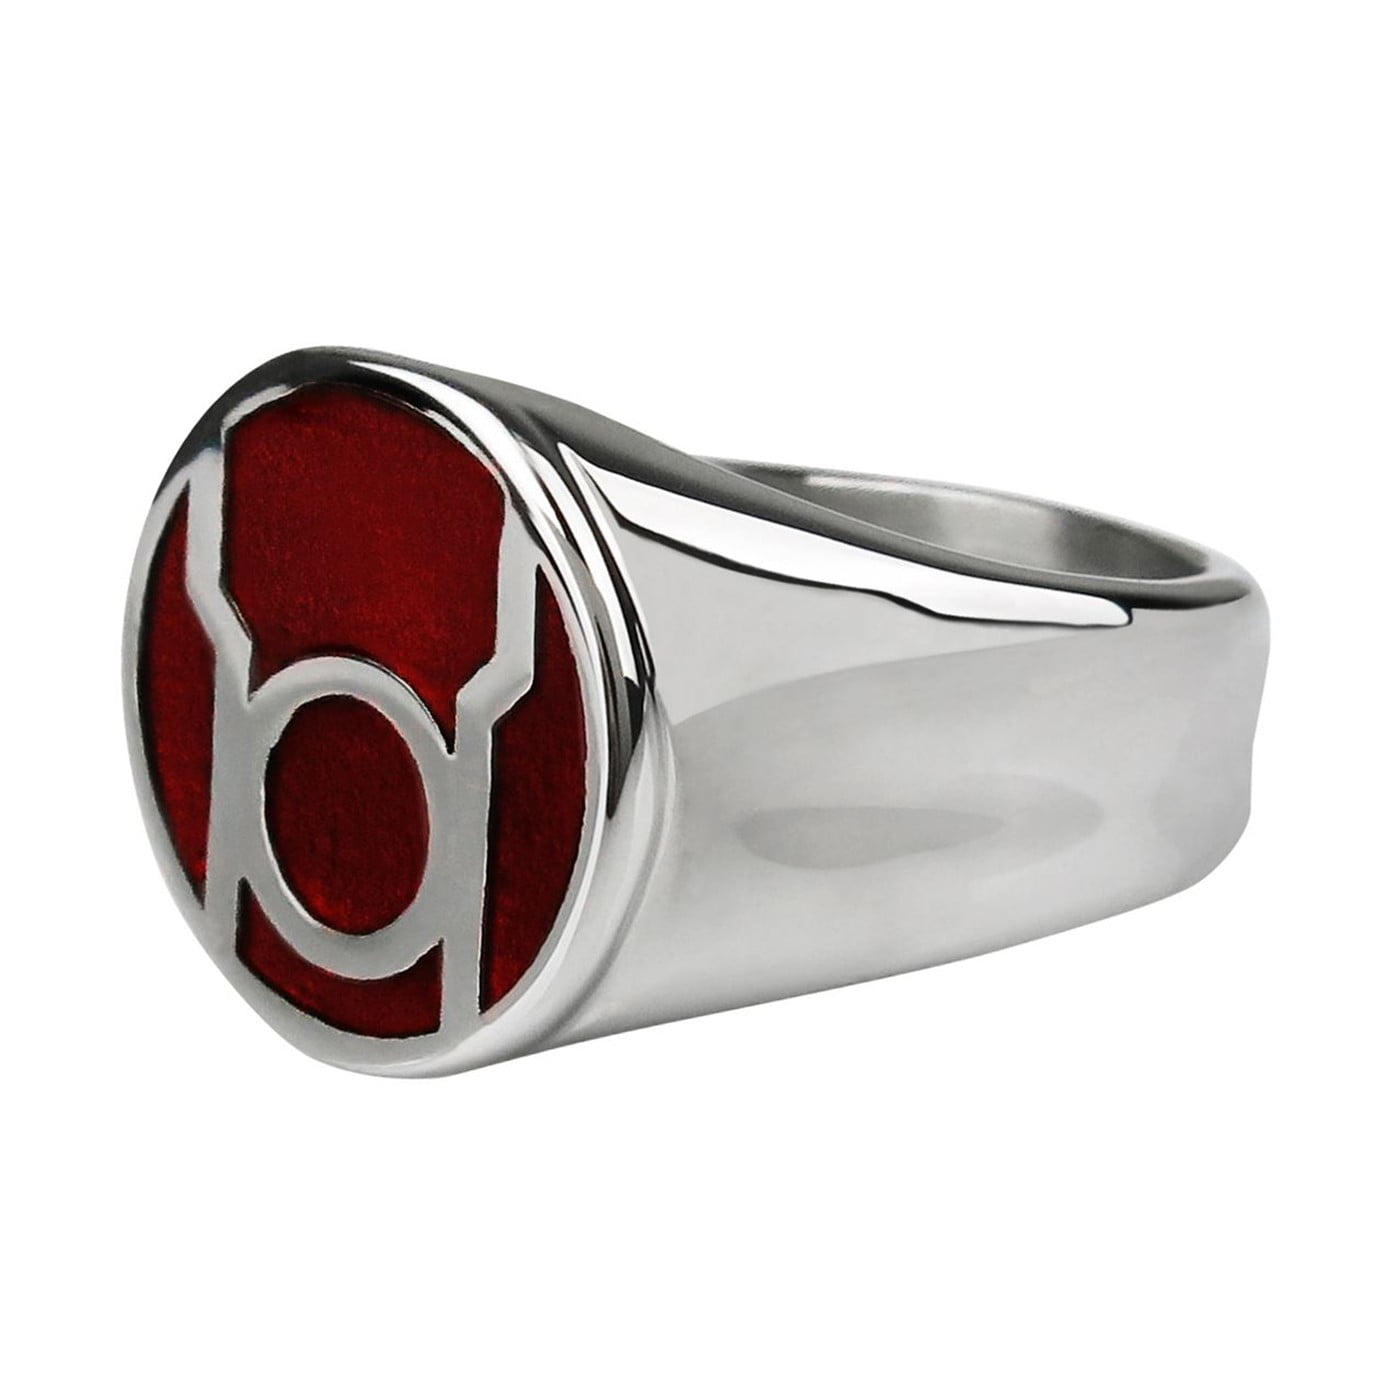 made in USA Red Lantern Corps Ring Translucent Red Resin 